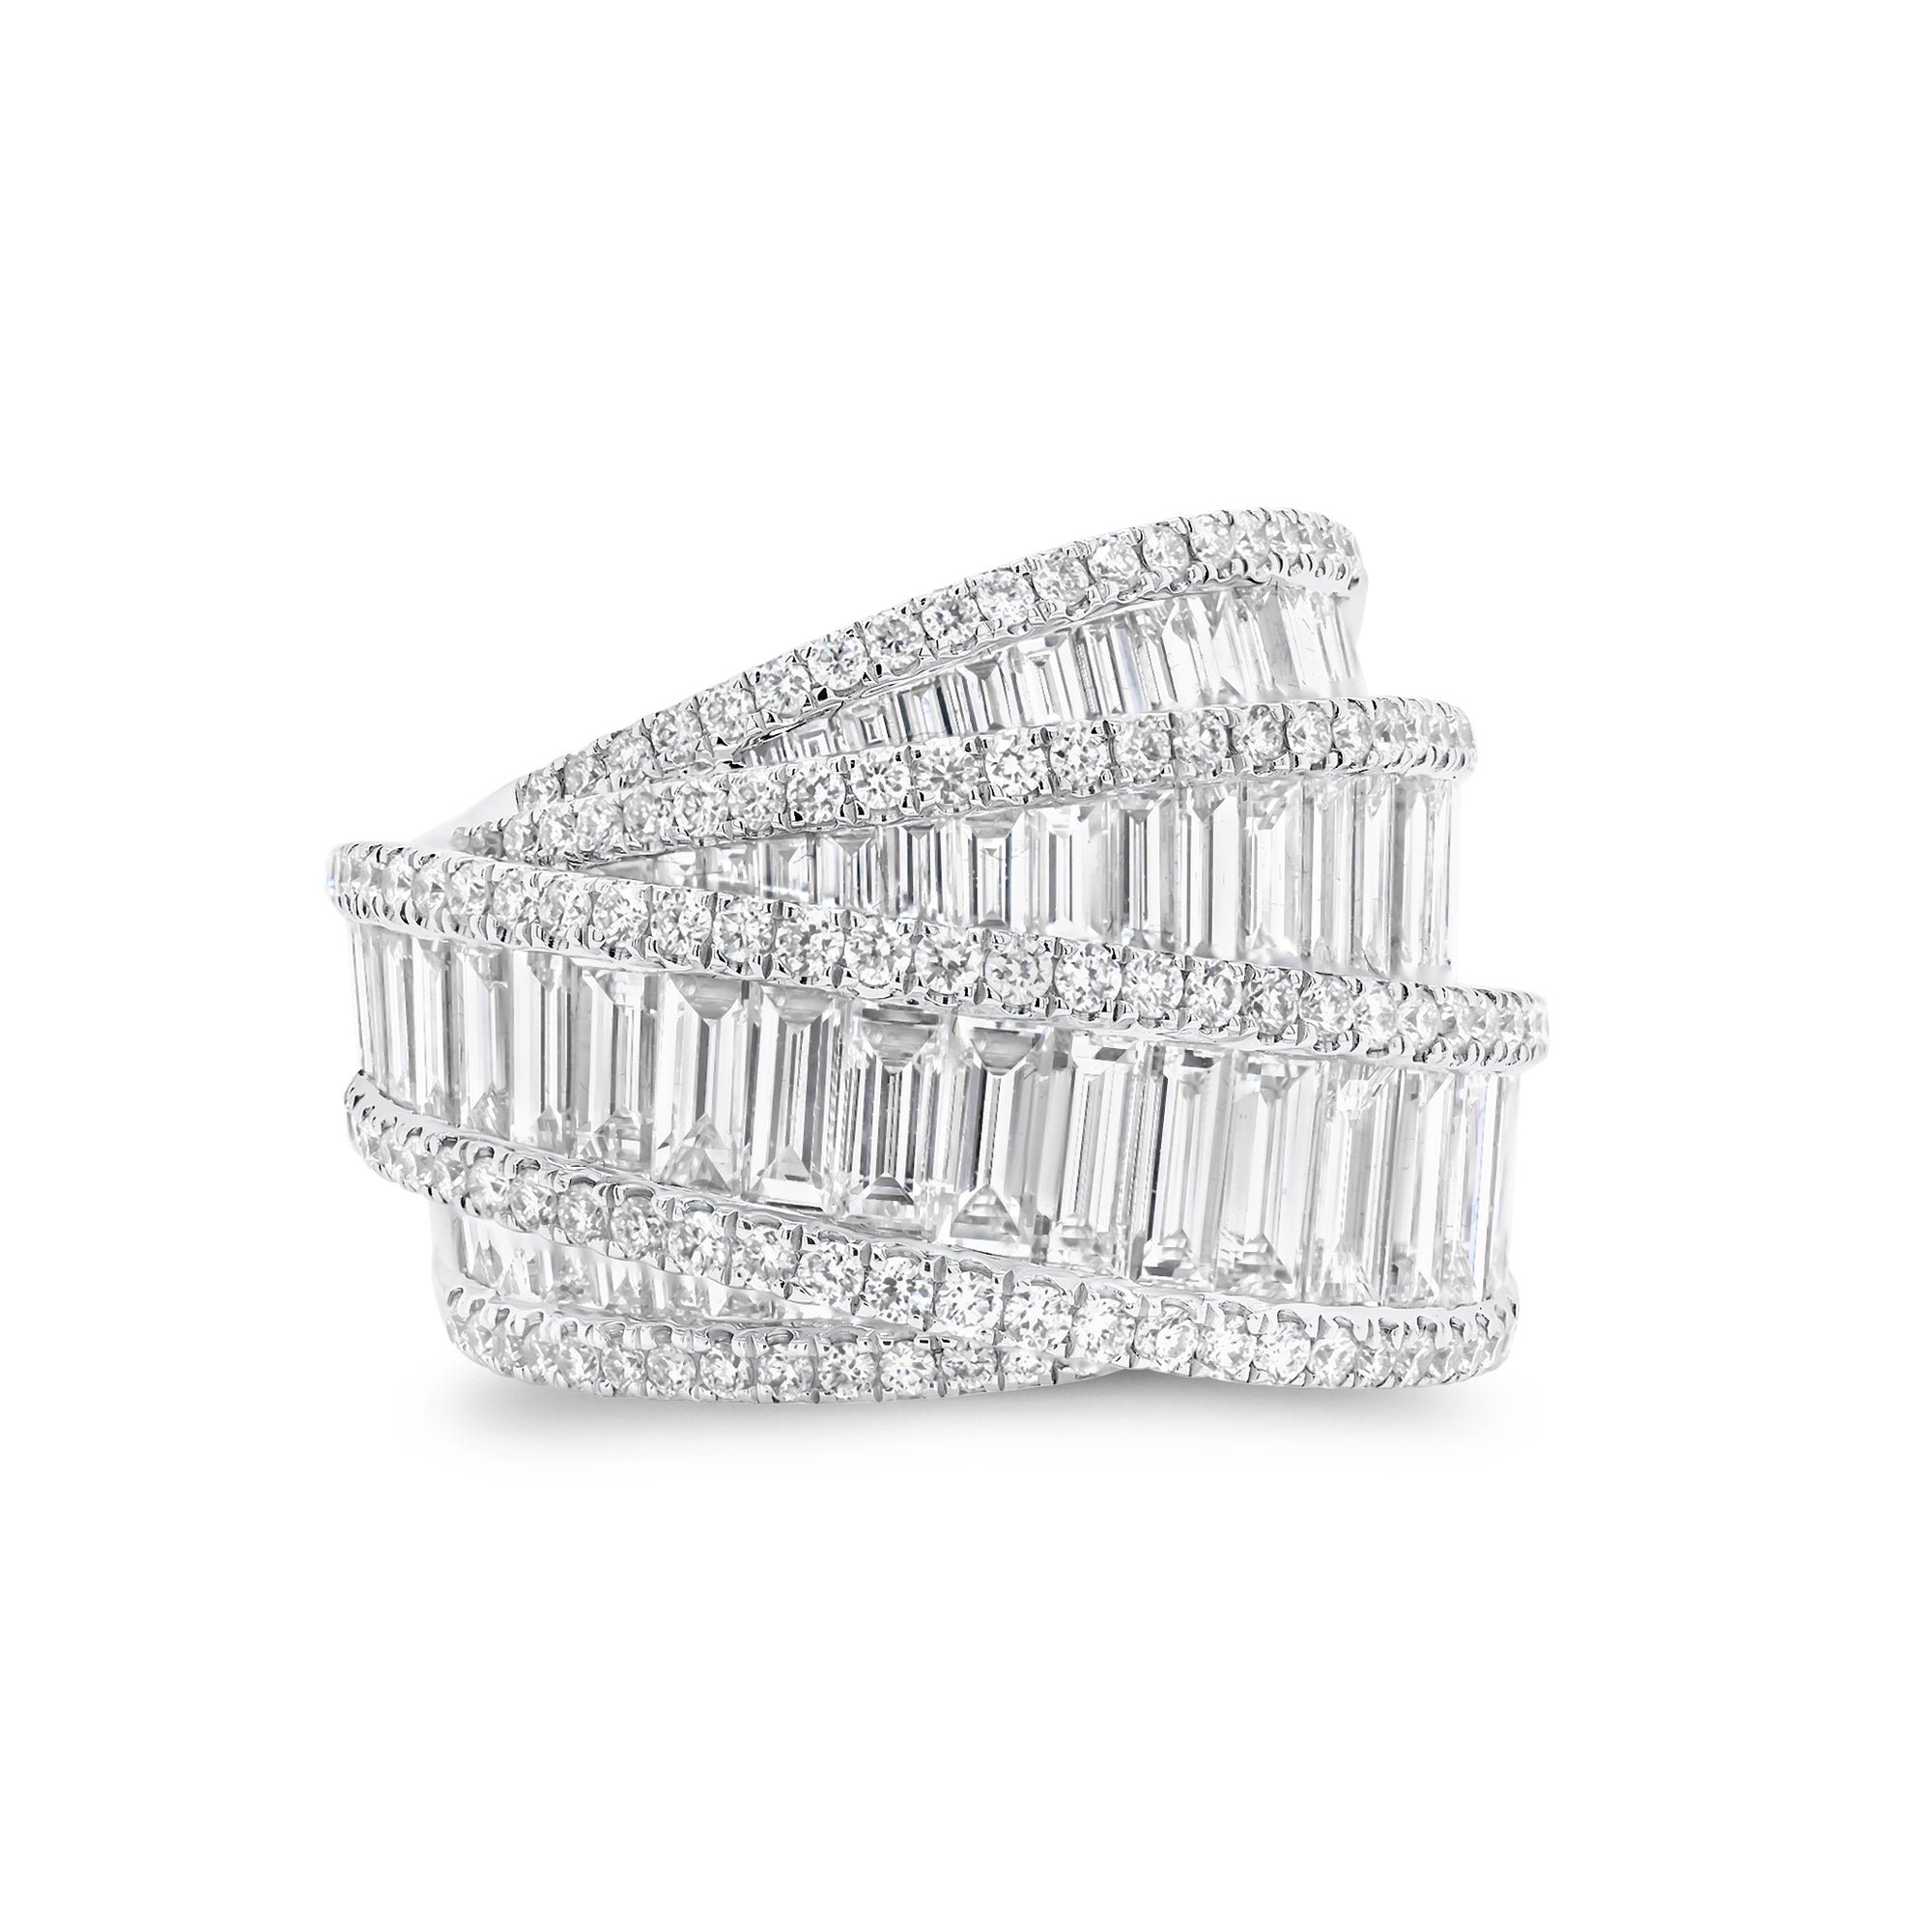 Baguette & Round Diamond Crossover Cocktail Ring - 18K gold weighing 11.73 grams  - 121 round diamonds weighing 0.65 carats  - 61 slim baguettes weighing 2.90 carats